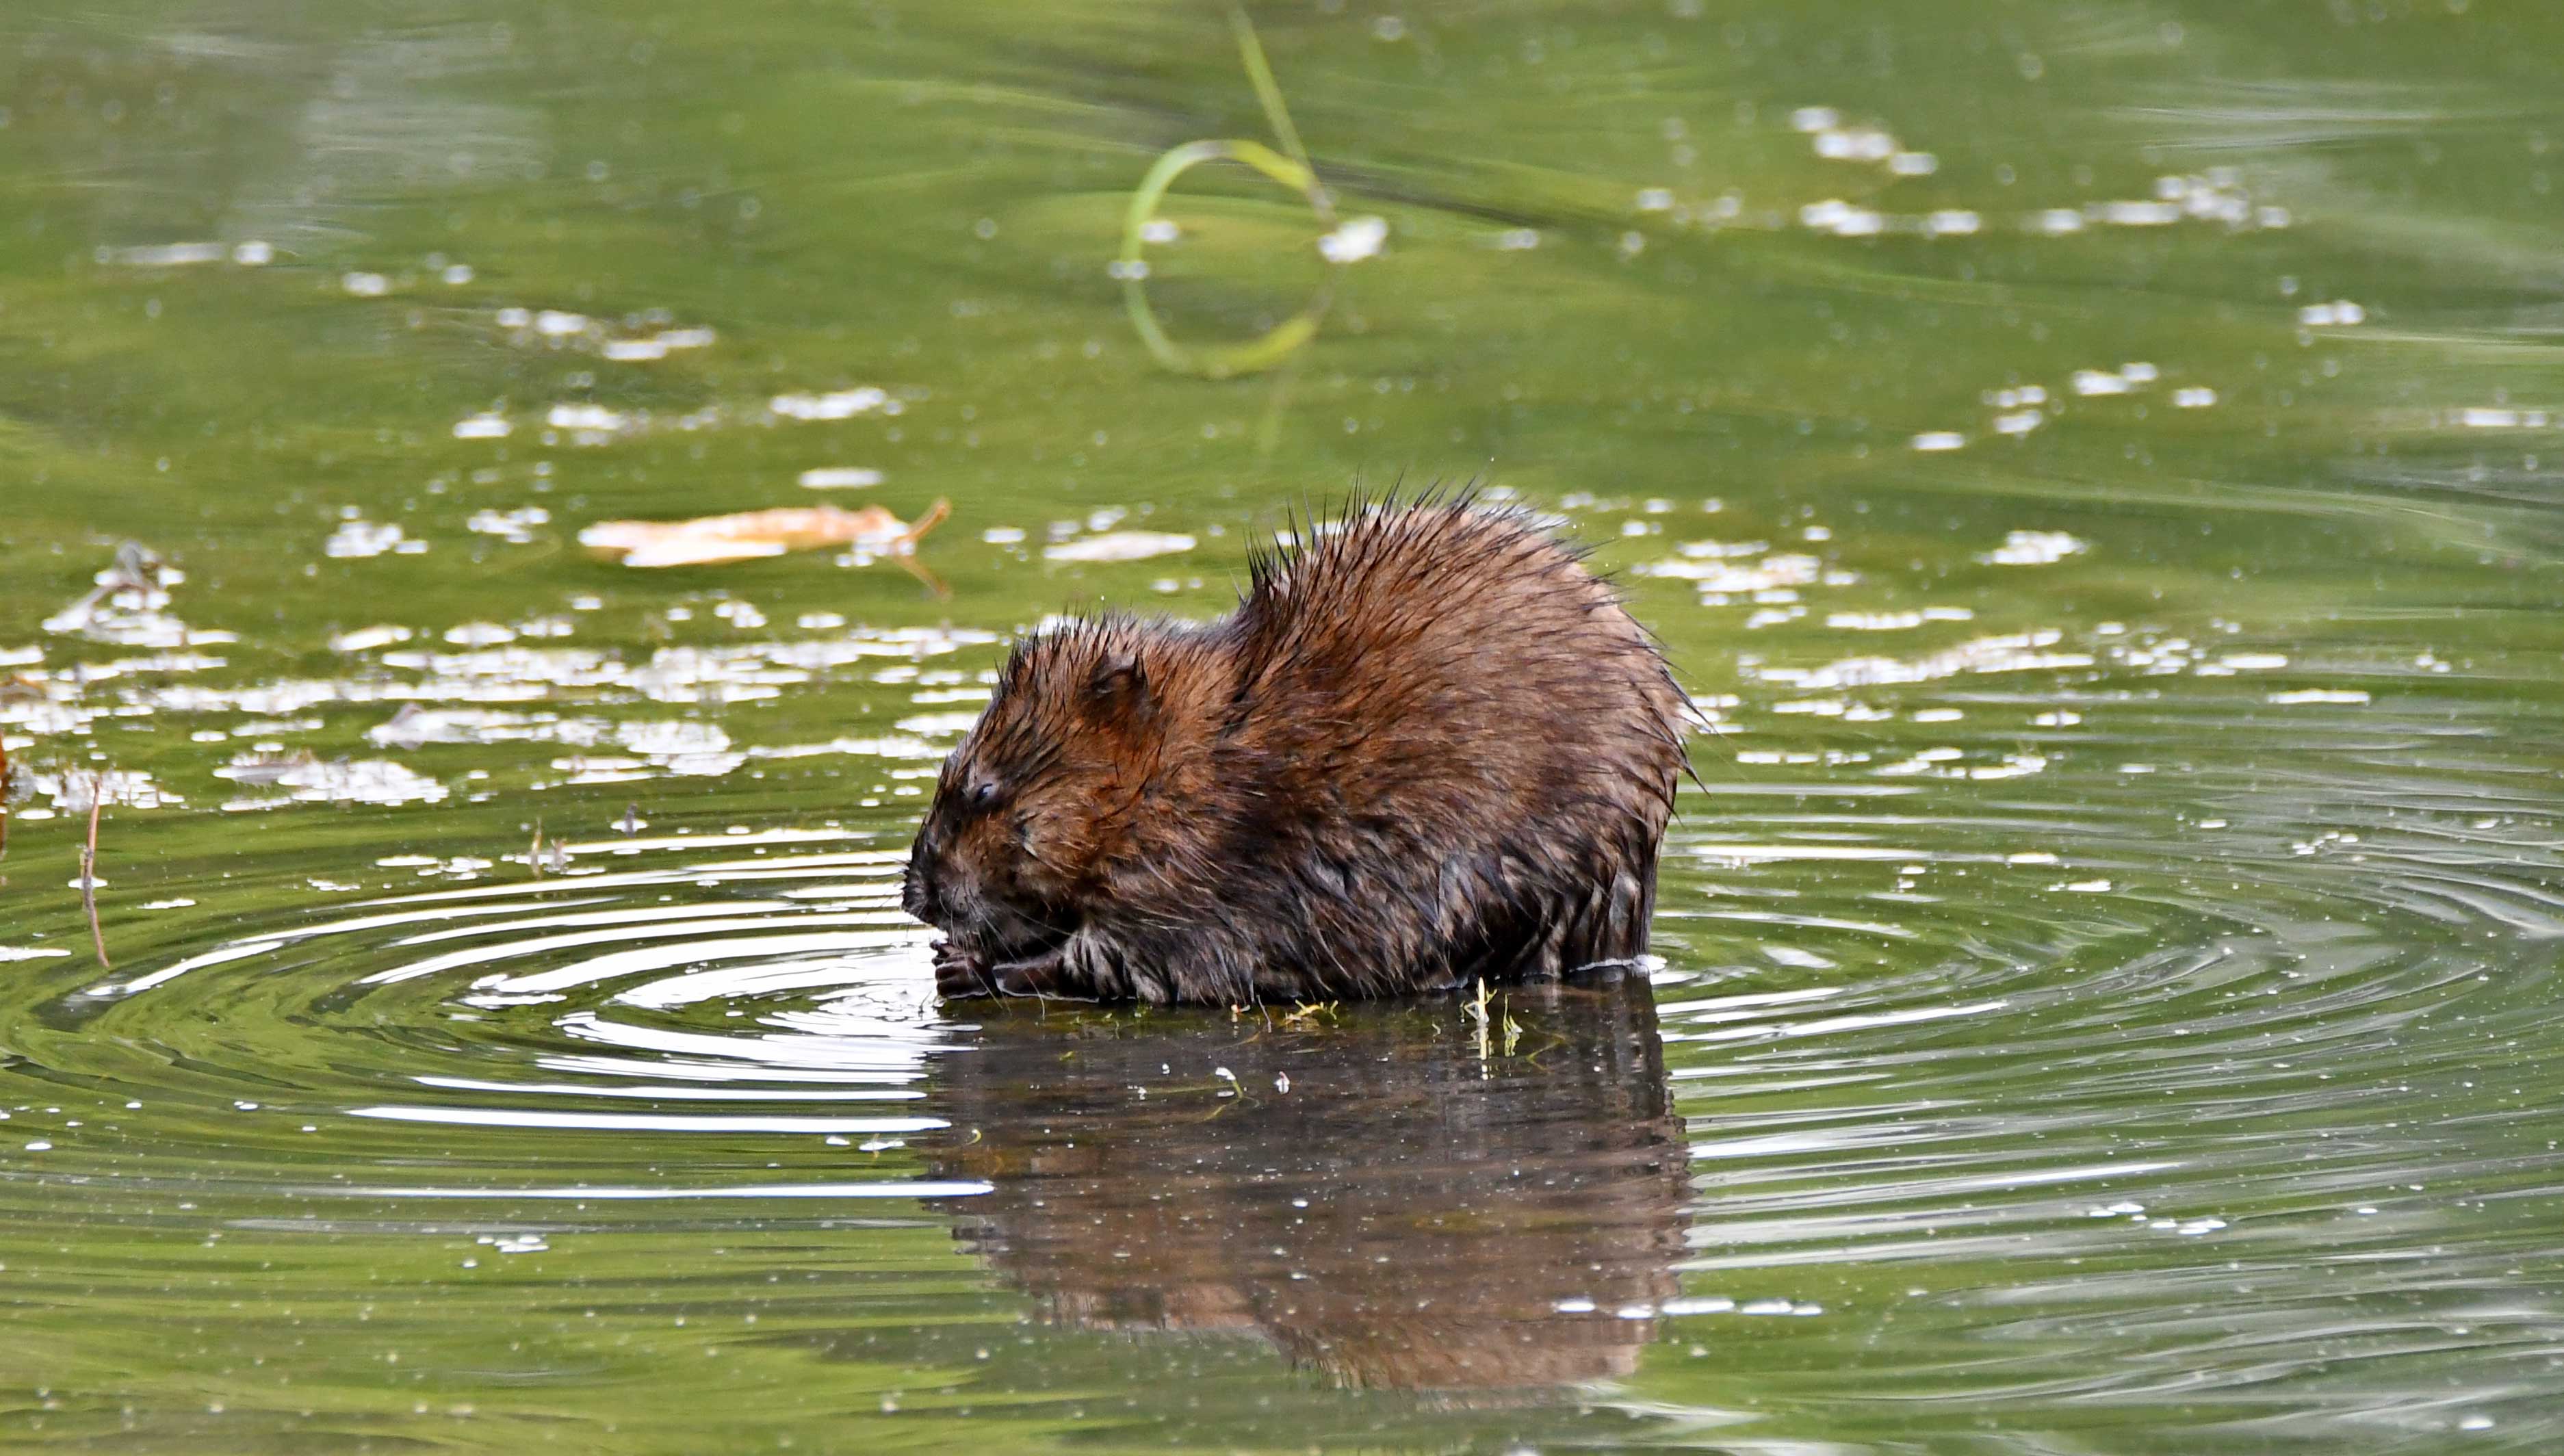 A muskrat eating in the water.